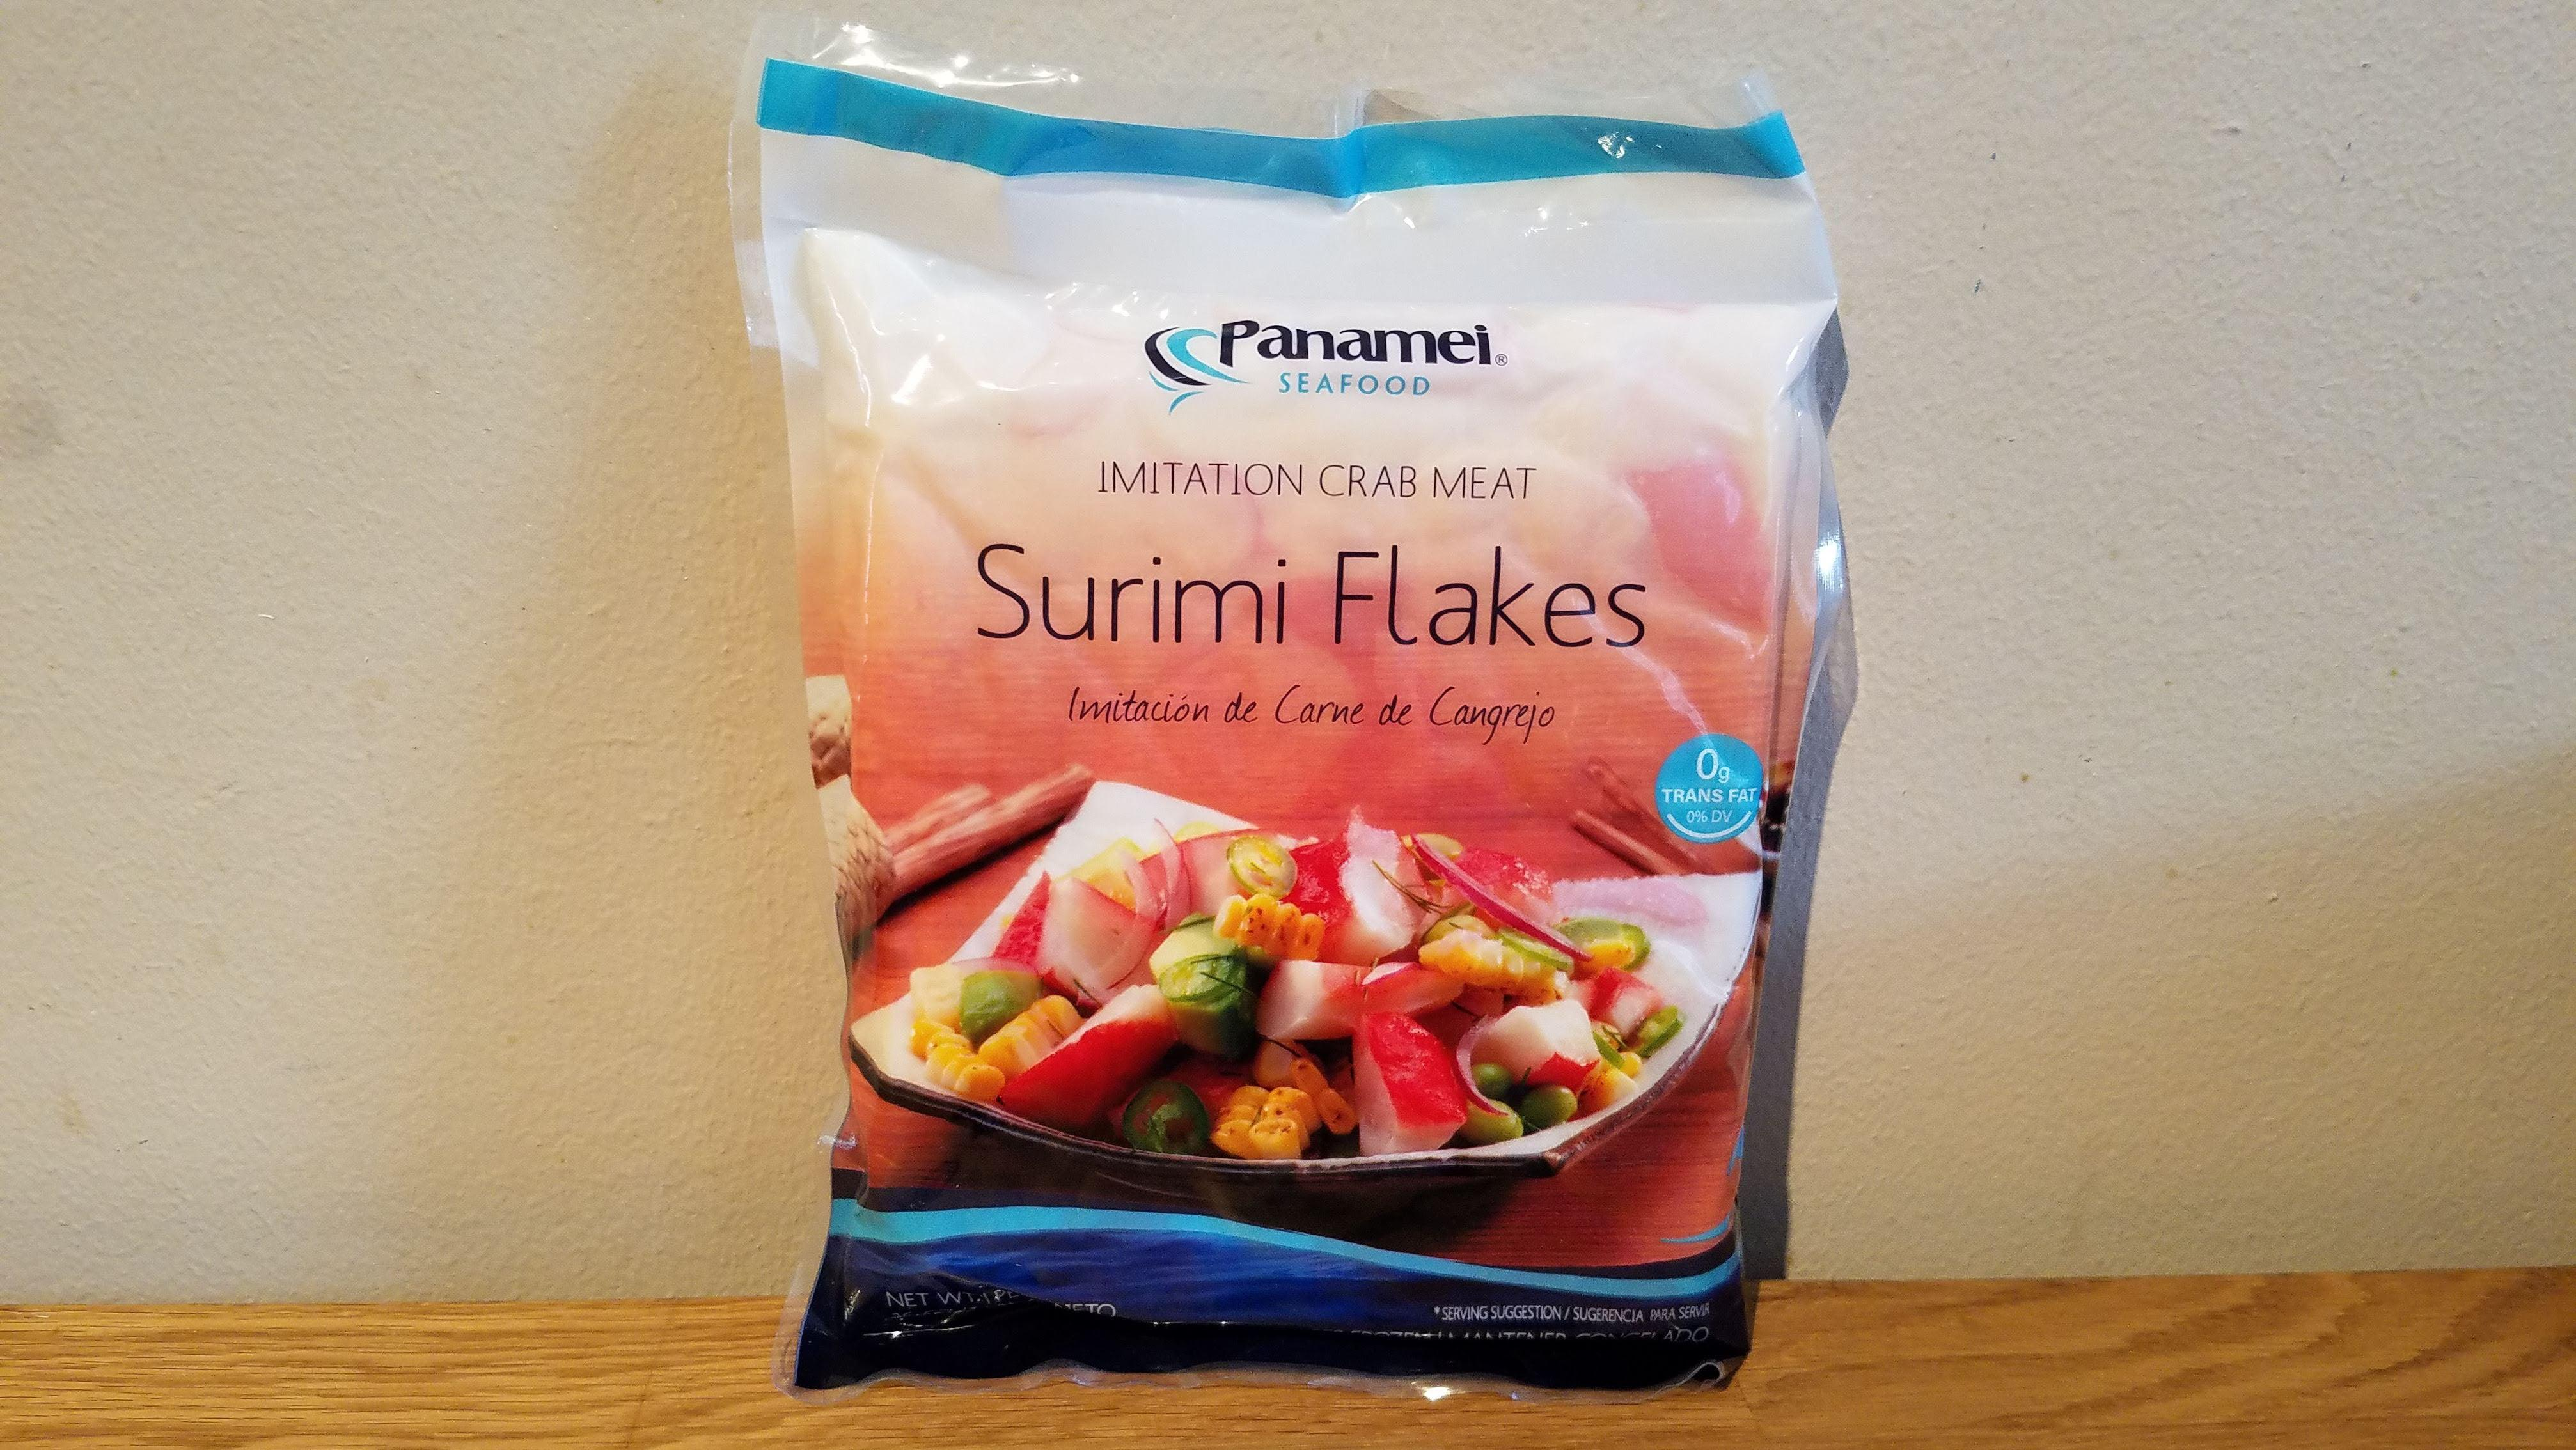 Package of Panamei Seafood brand Surimi Flakes imitation crab meat